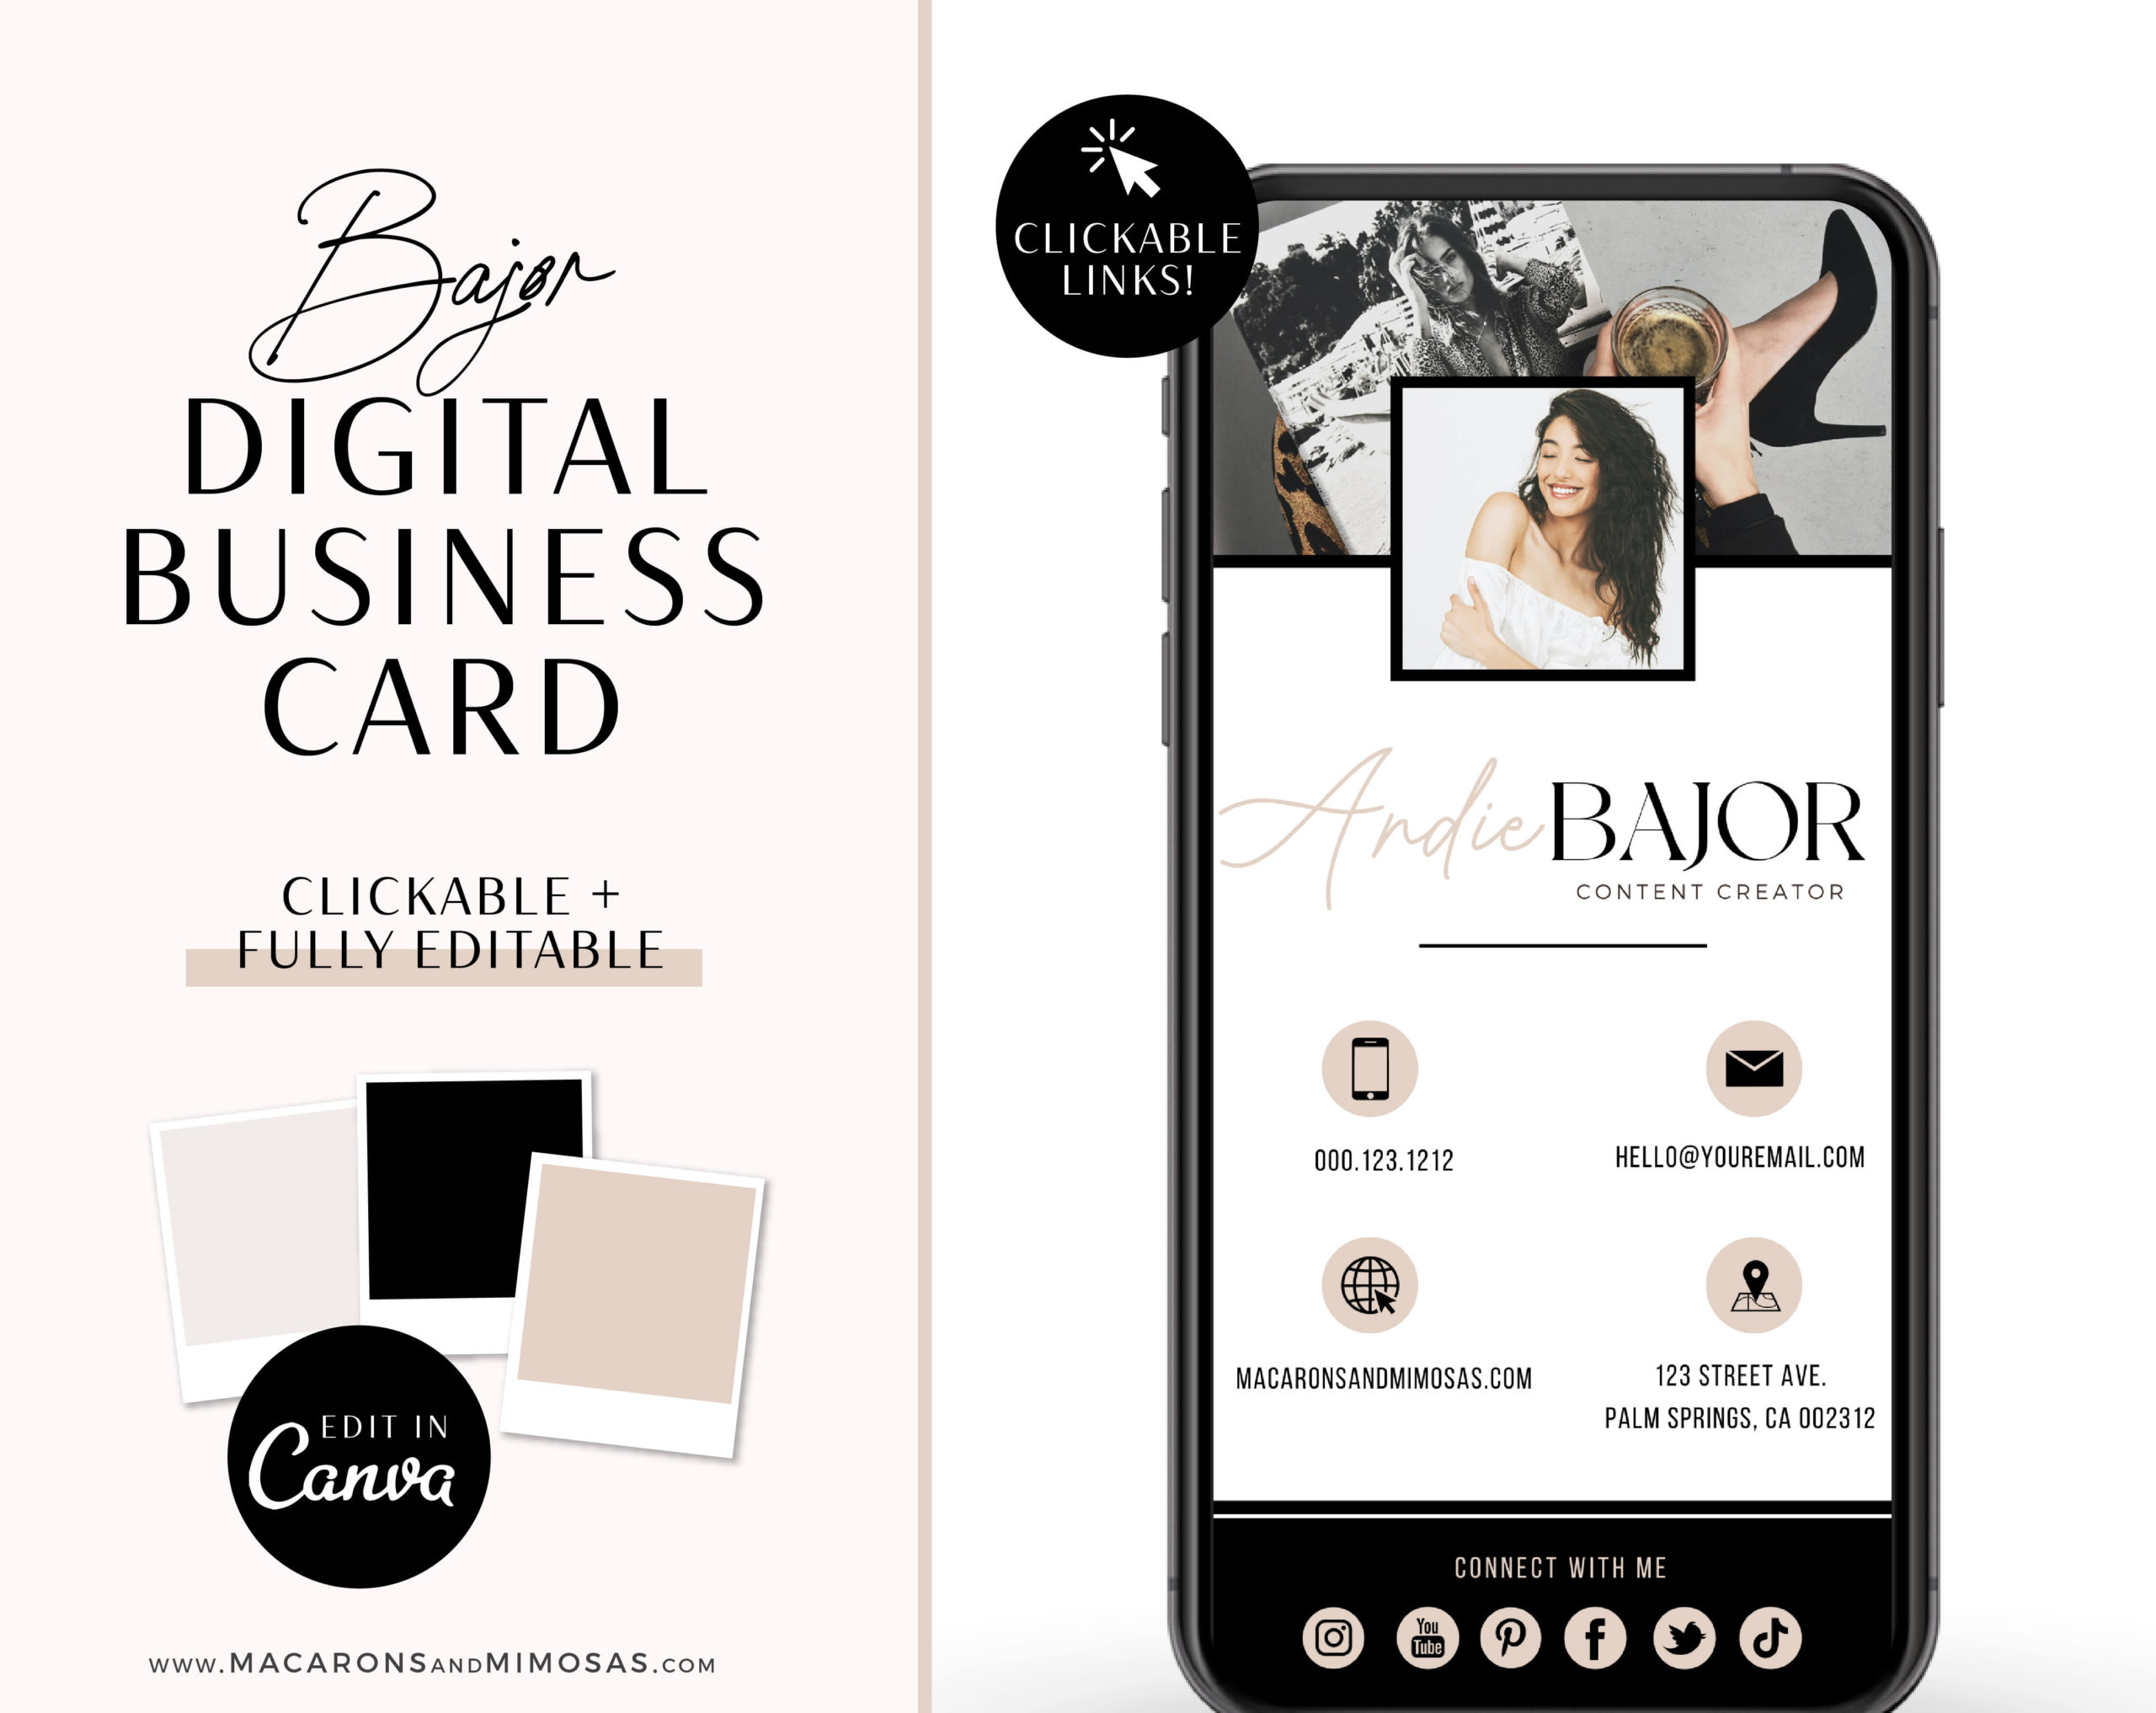 Digital business card Canva template with clickable links, How to create DIY Modern Minimalist Blush Black Real Estate Digital Business Card